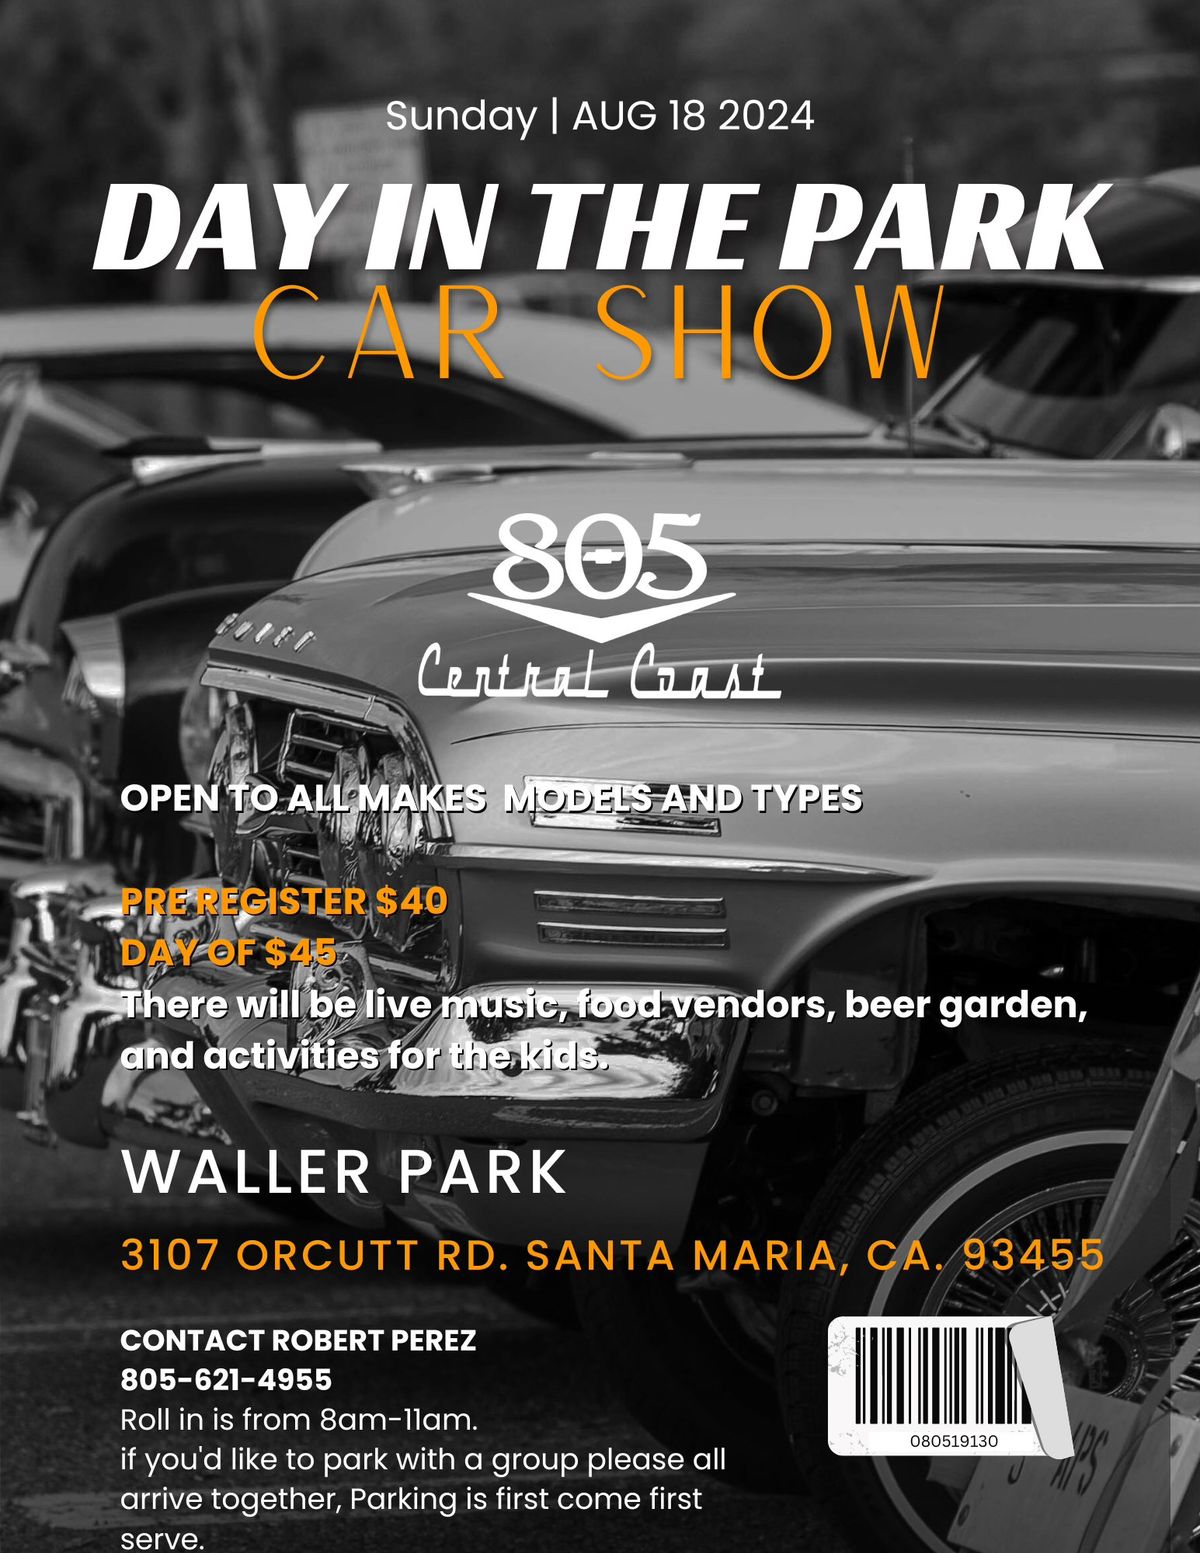 DAY IN THE PARK CAR SHOW